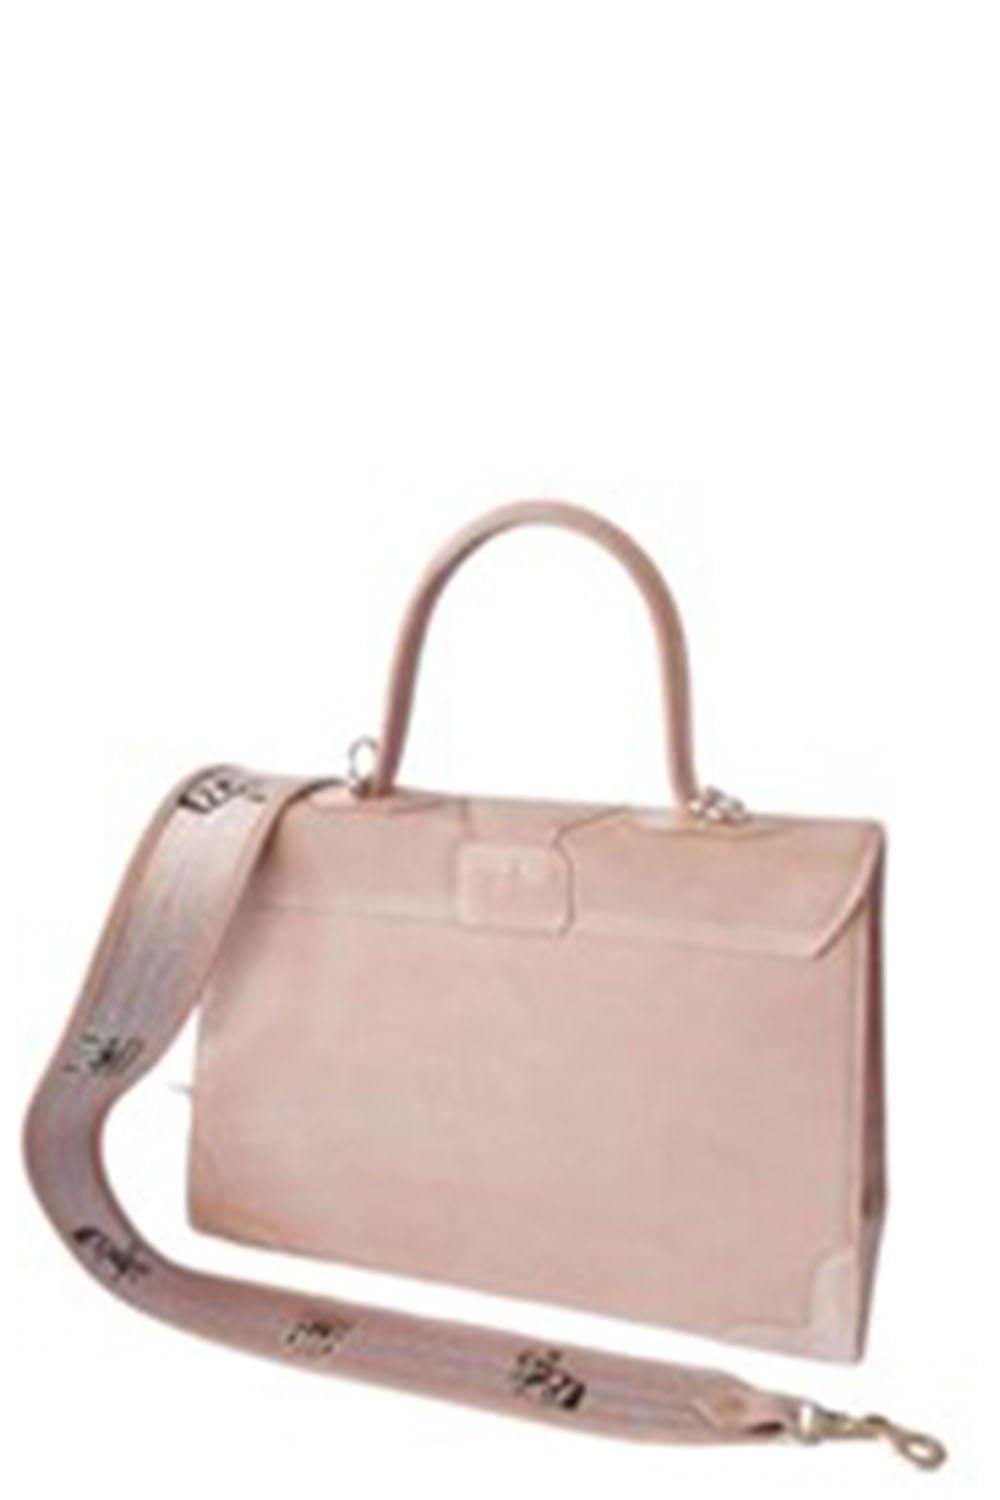 MARQUISE PARIS-Champs Elysees Top Handle Bag-CHAMPAGNE ROSE